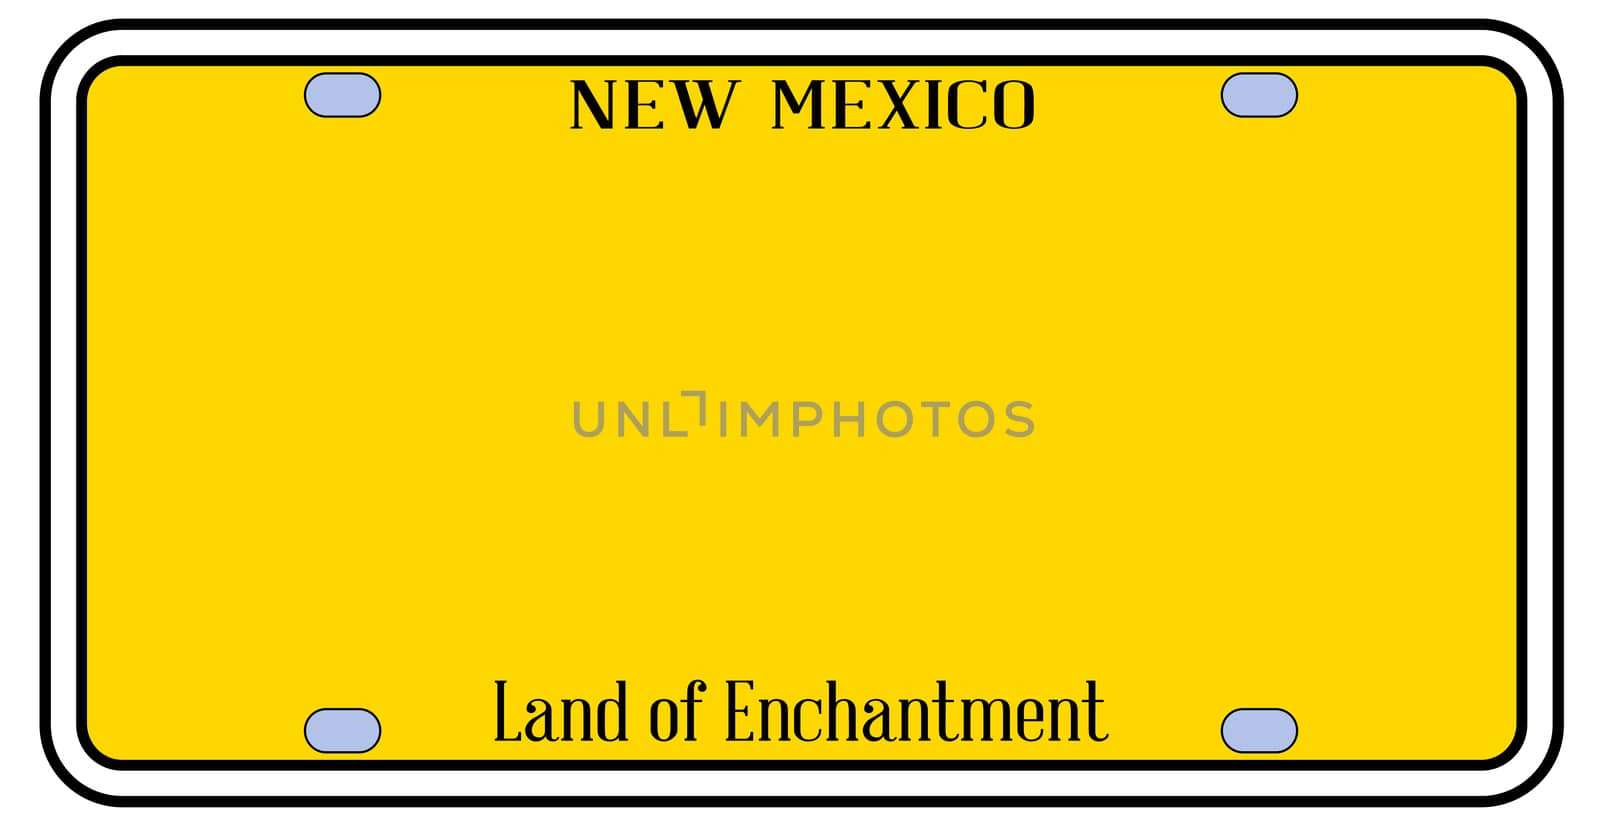 New Mexico state license plate in the colors of the state flag over a white background